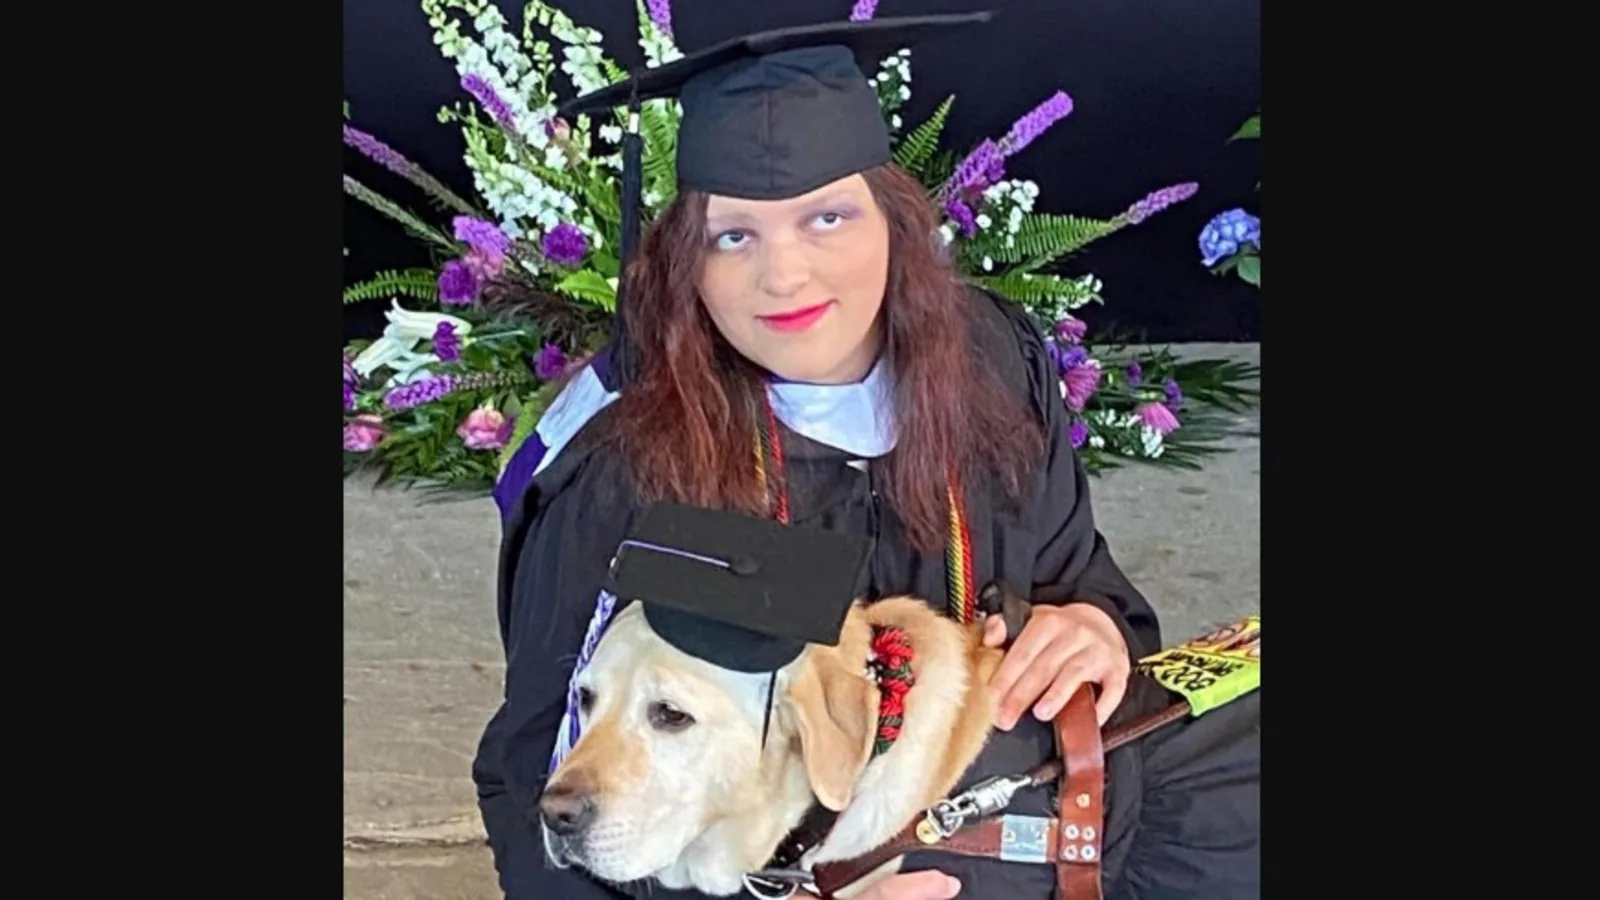 Woman takes her guide dog on stage as she graduates from college. Watch